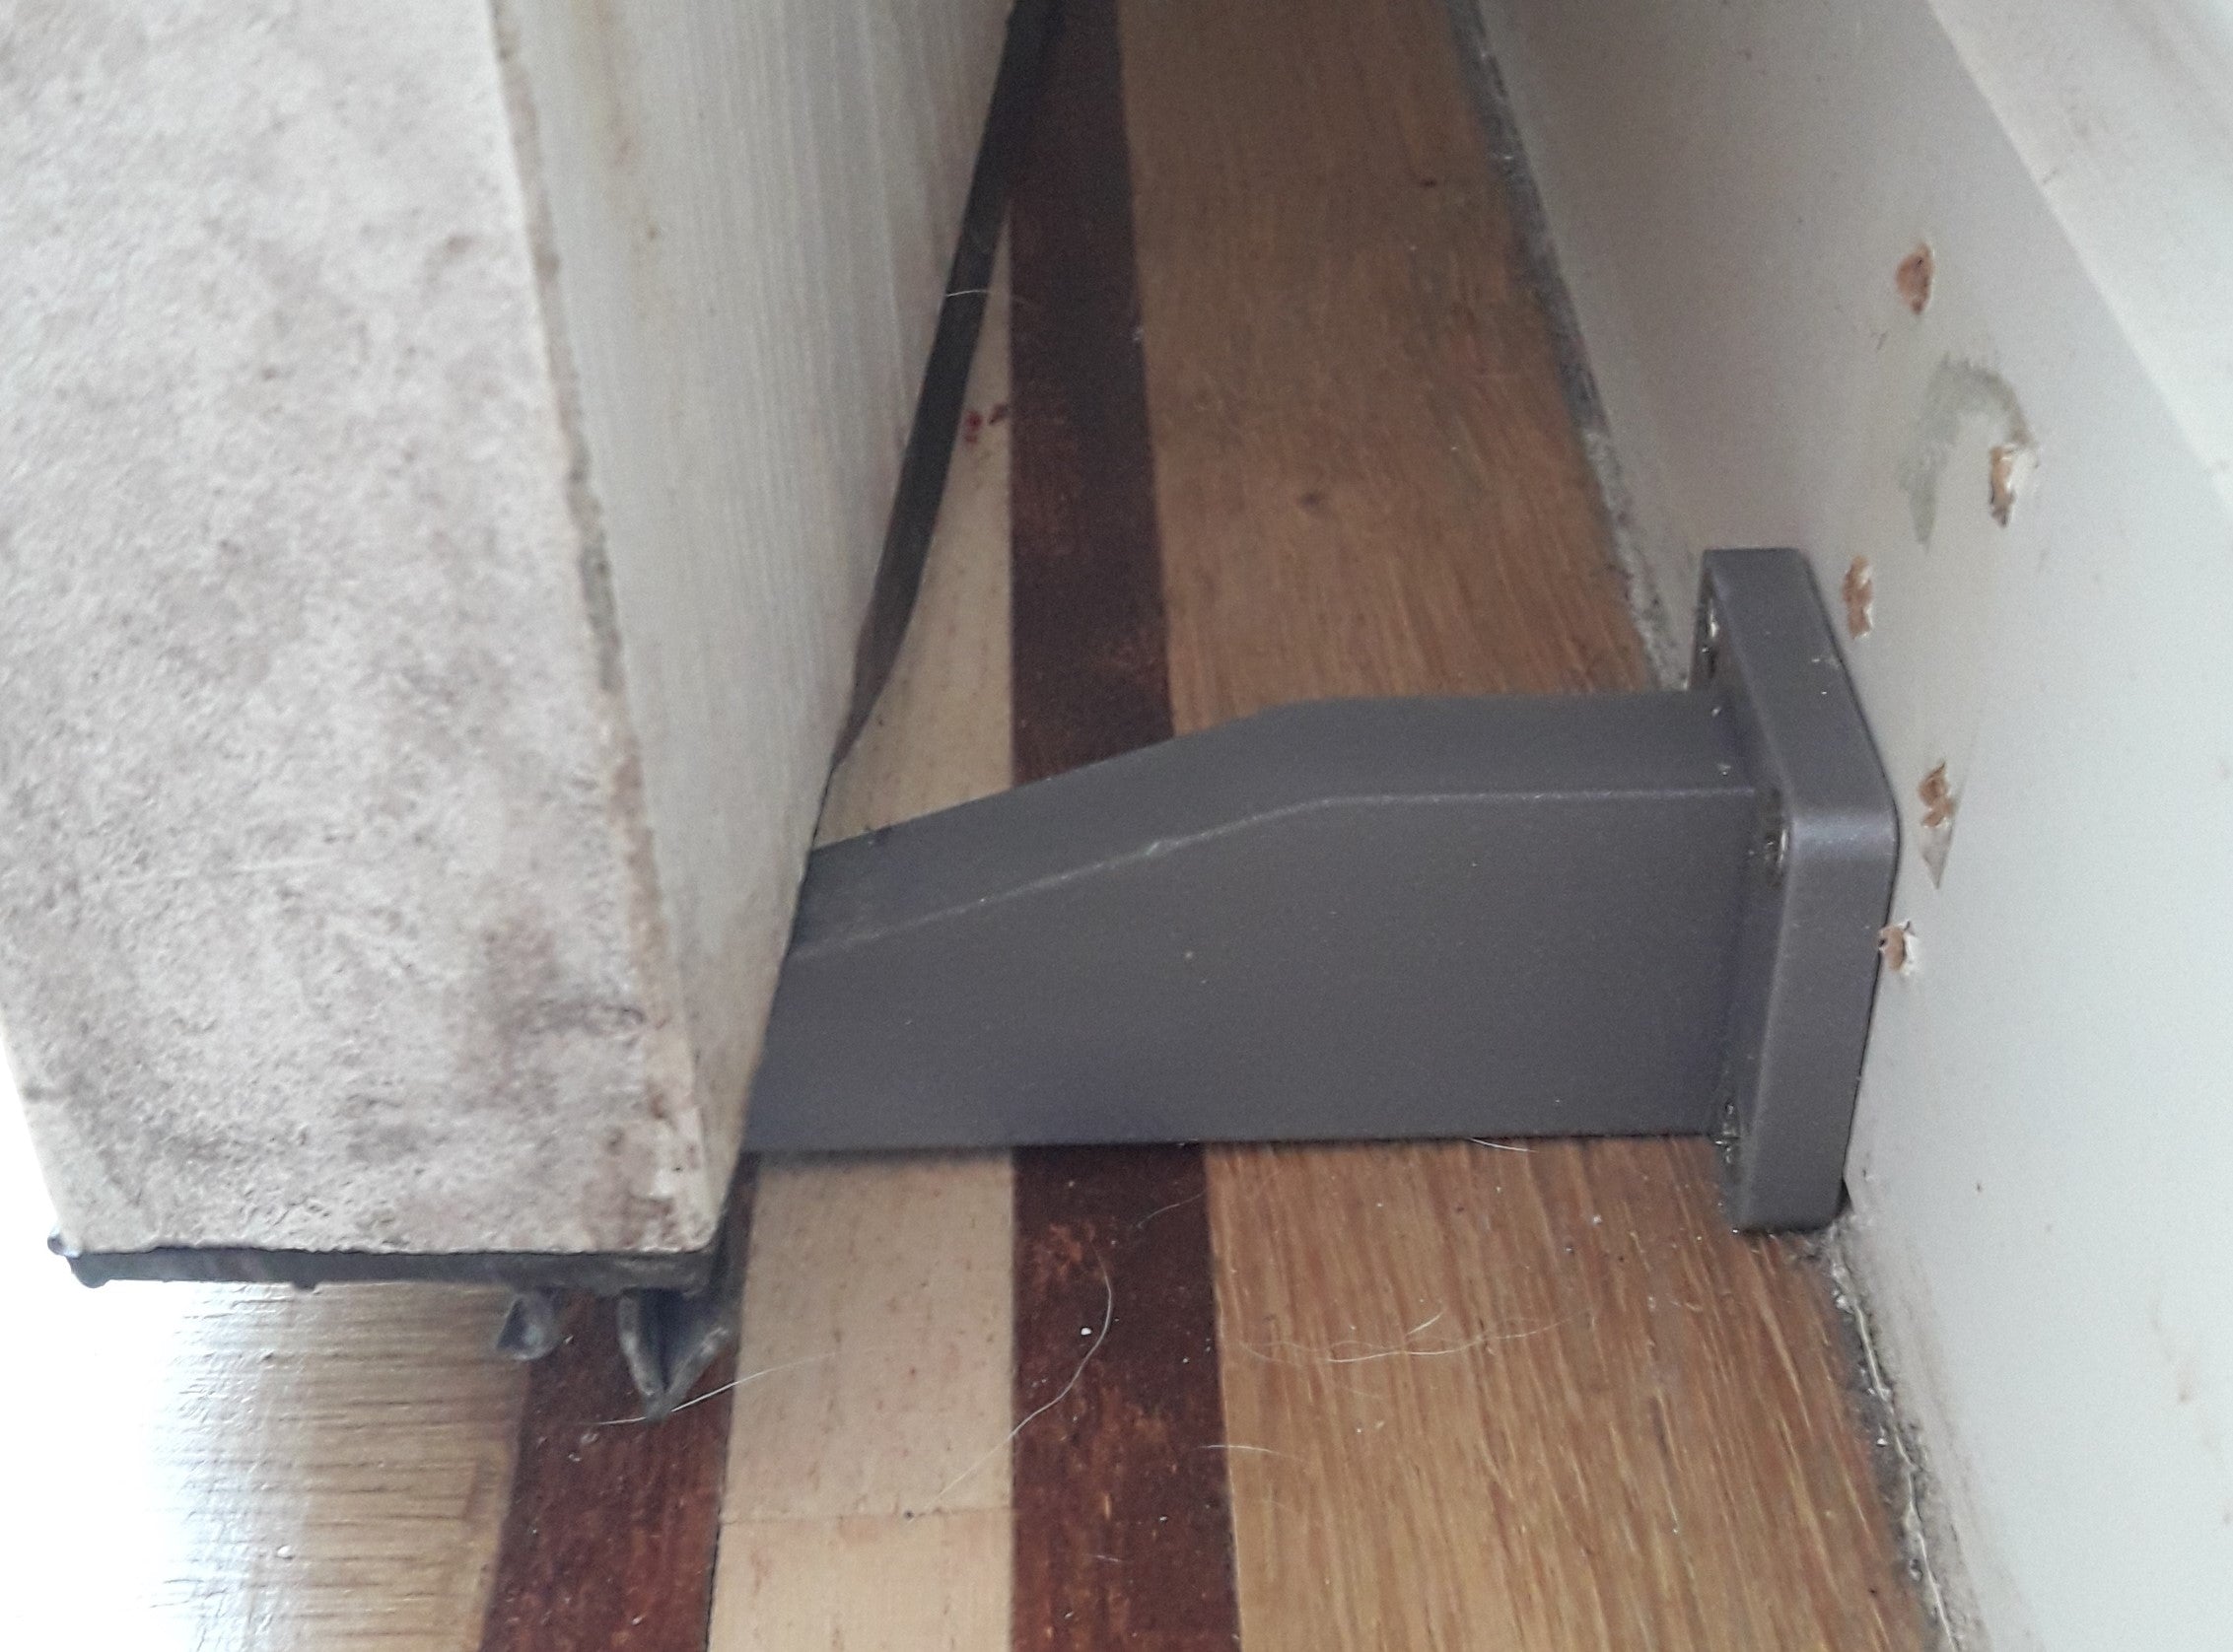 Larger version of the doorstop